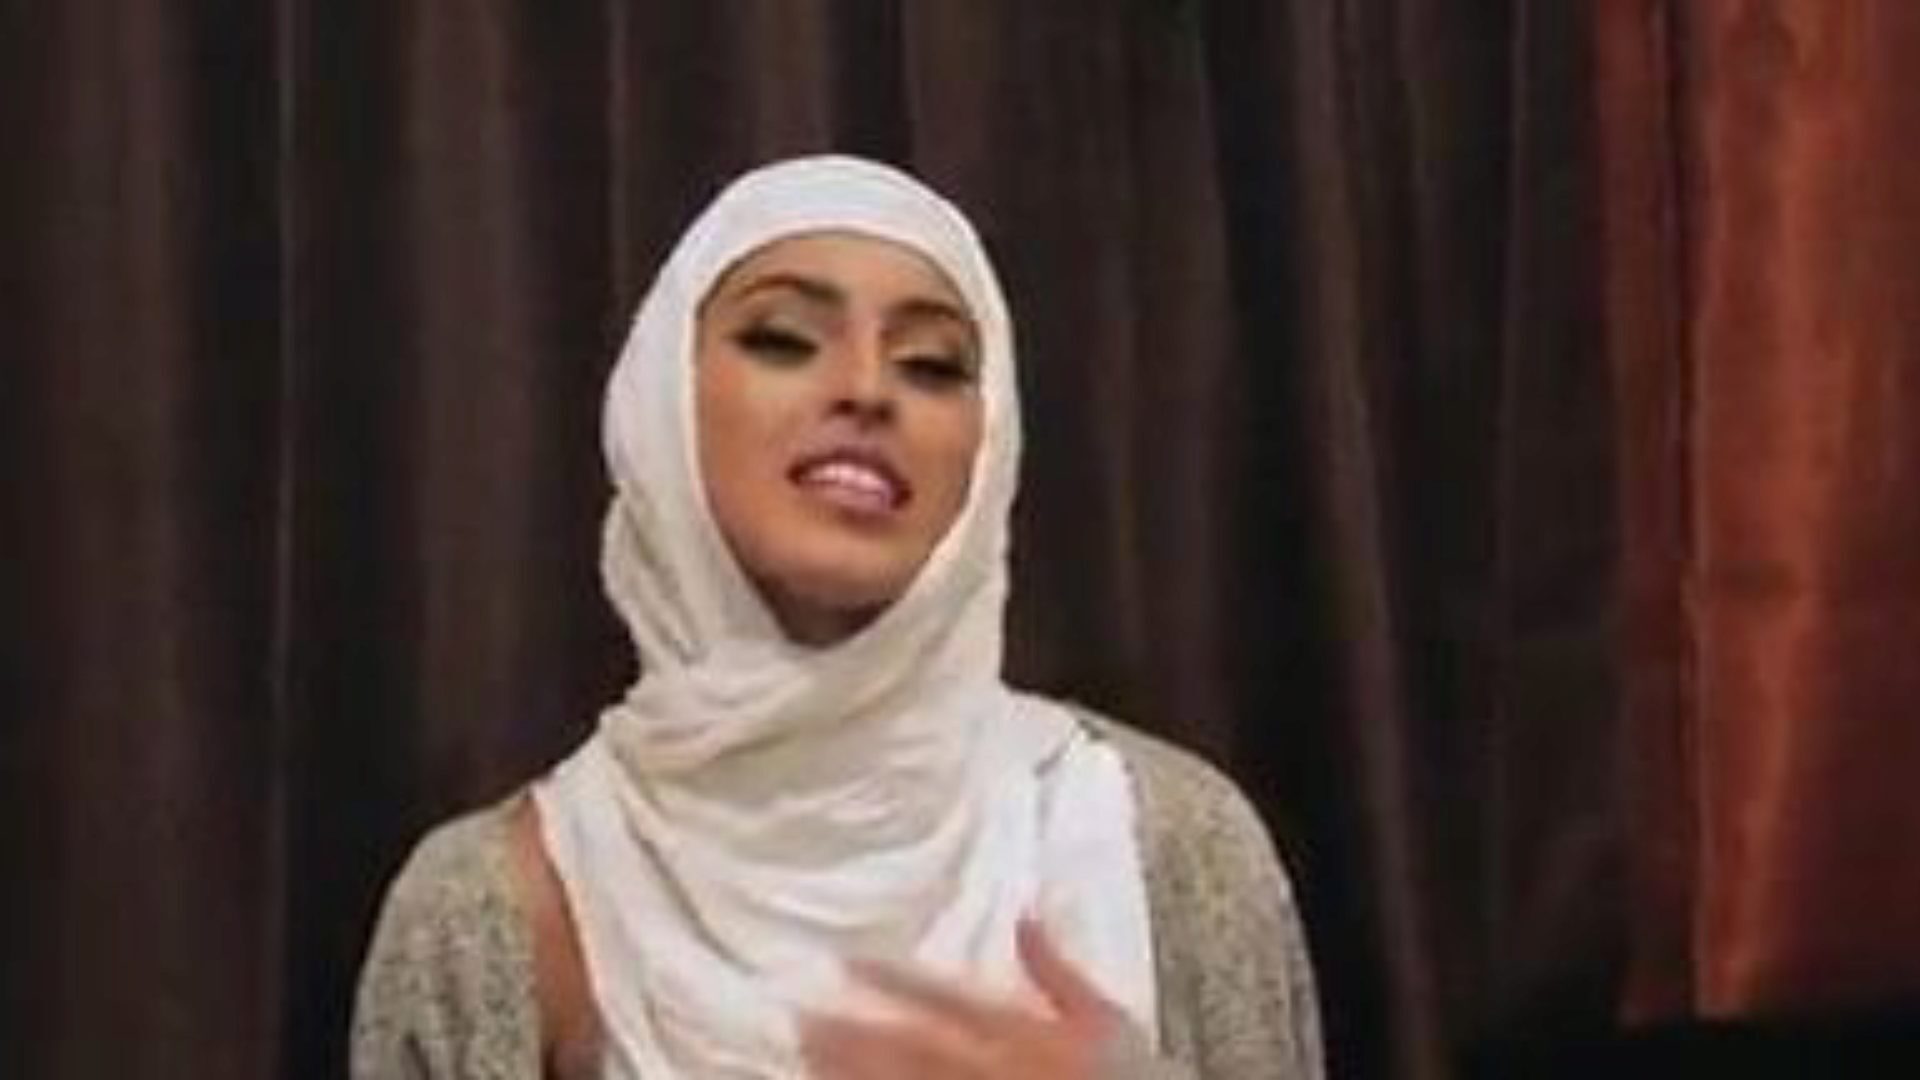 Shy Inexperienced Girls Fuck in Their Hijabs: Free Porn 5e Watch Shy Inexperienced Girls Fuck in Their Hijabs episode on xHamster - the ultimate archive of free Xnxx for Free & Bel Ami hardcore porn tube vids